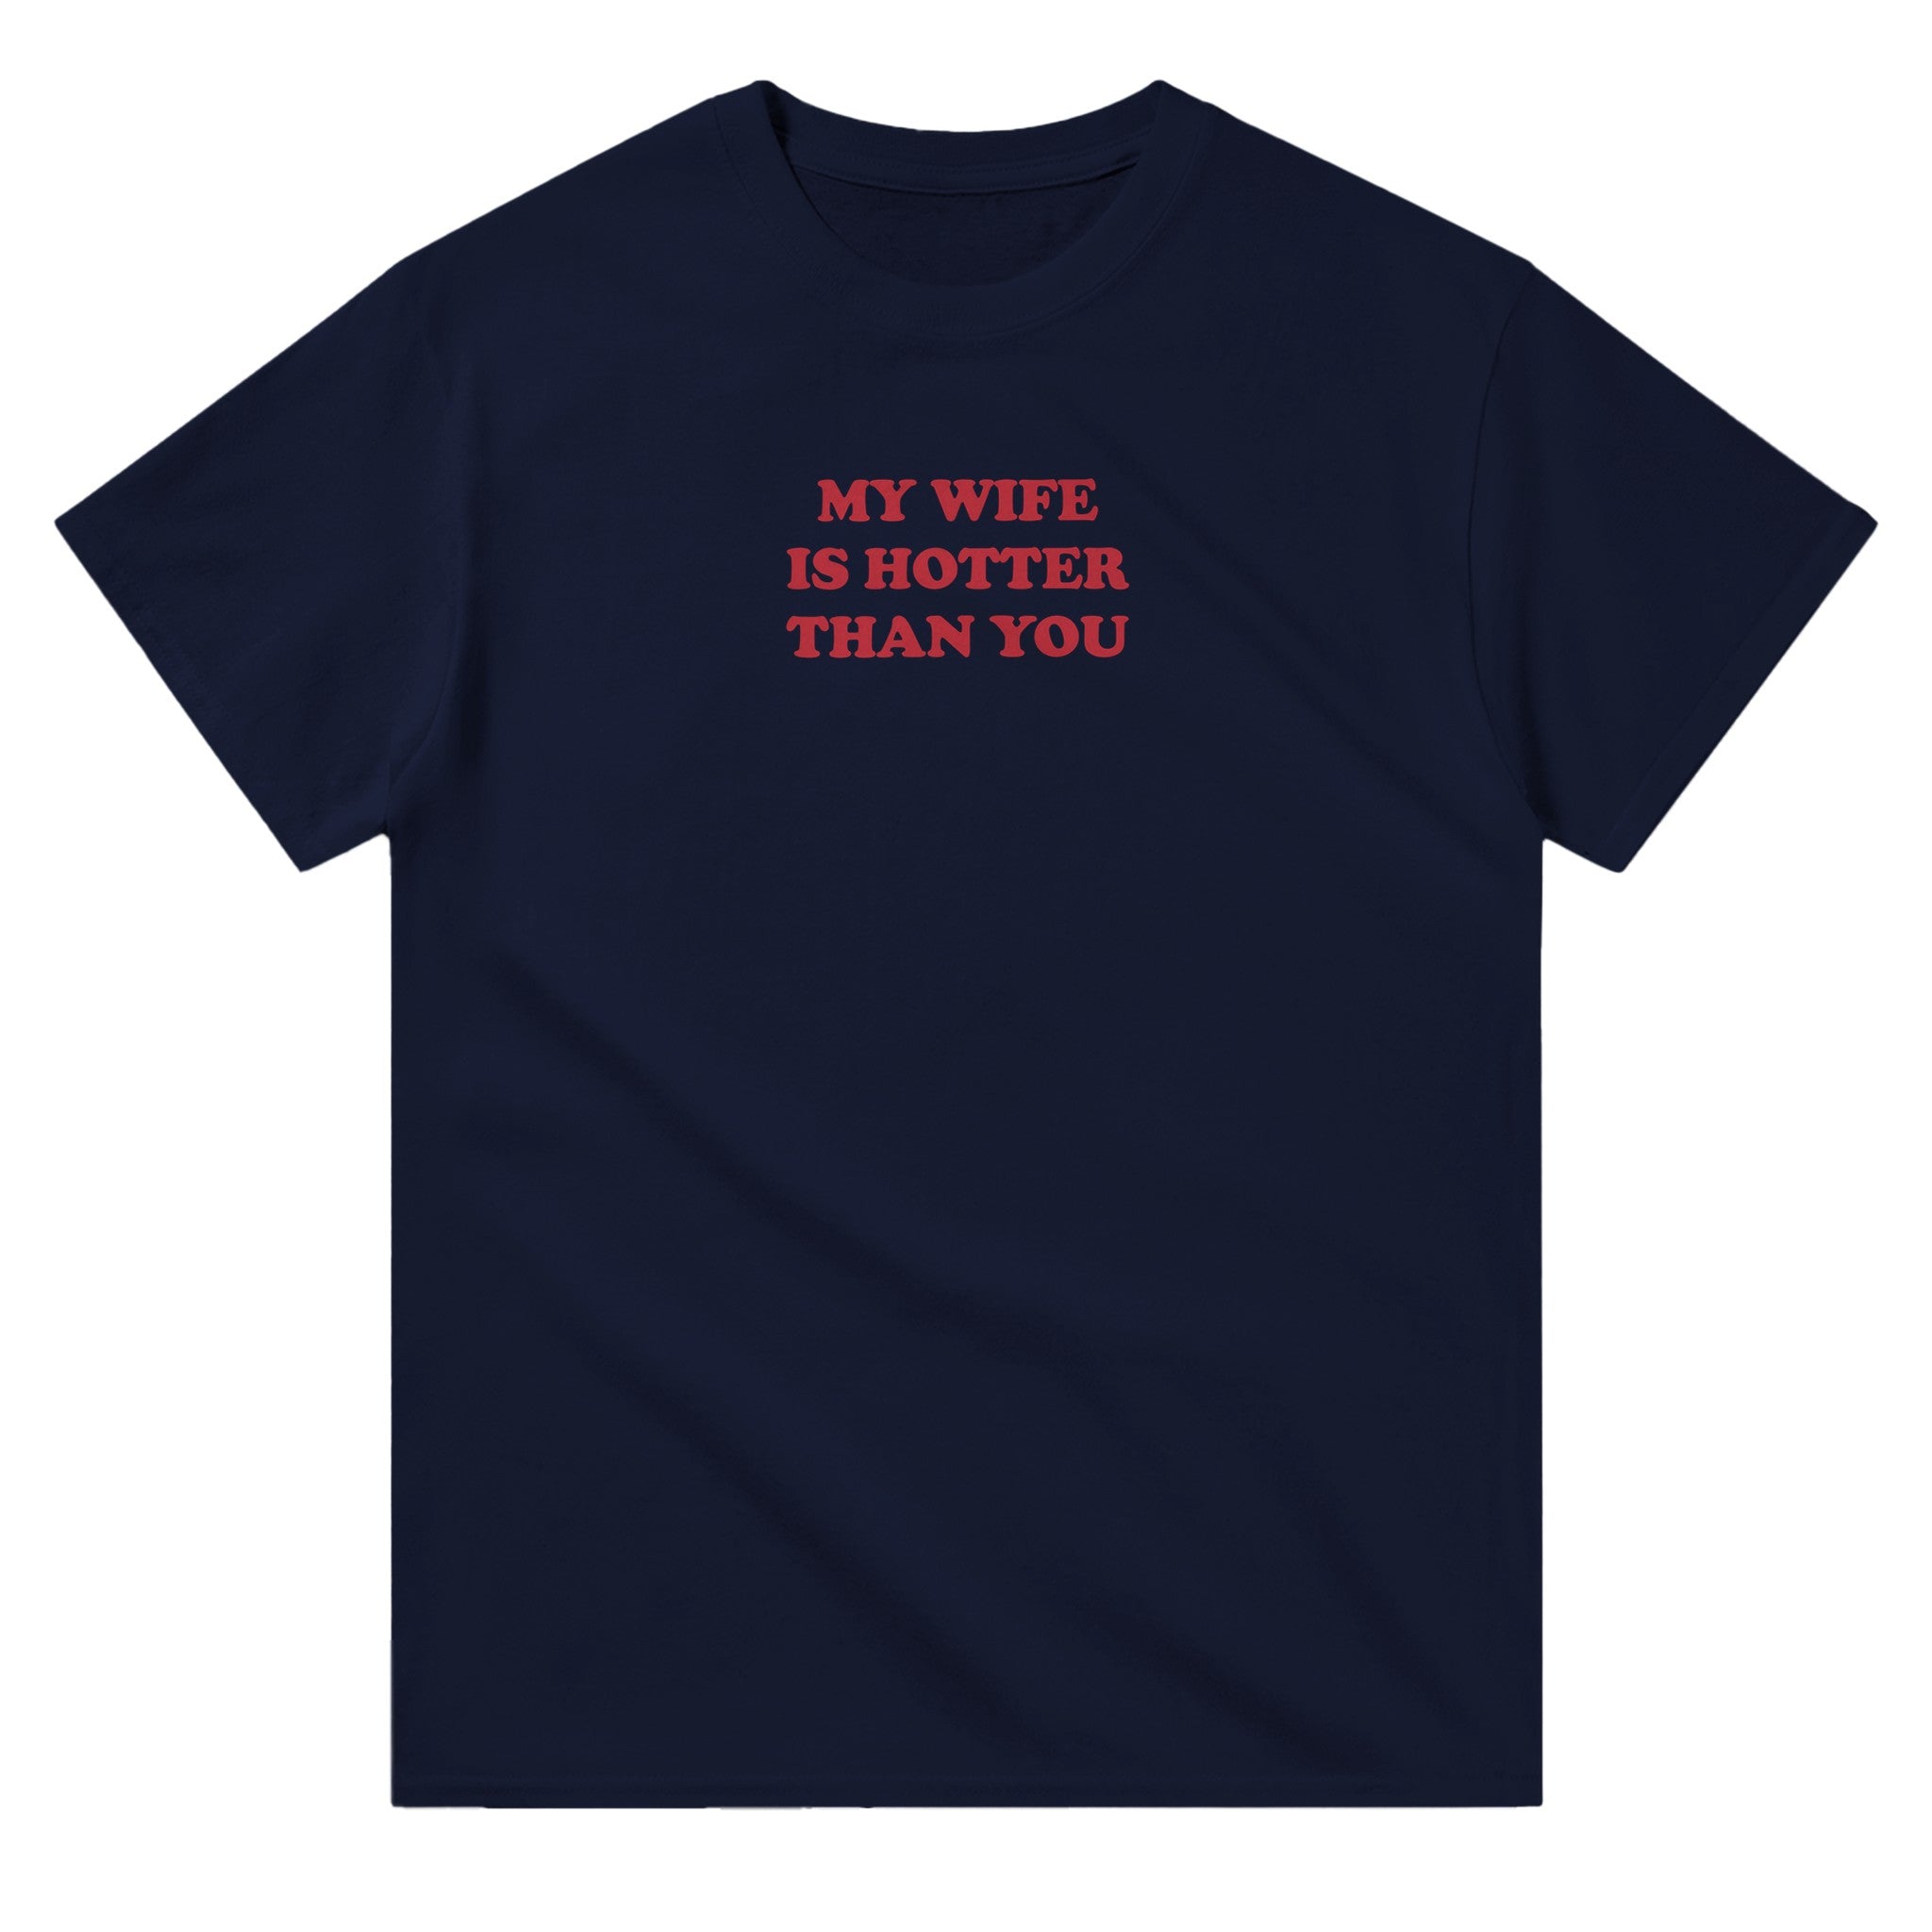 'My Wife is Hotter Than You' classic tee - In Print We Trust